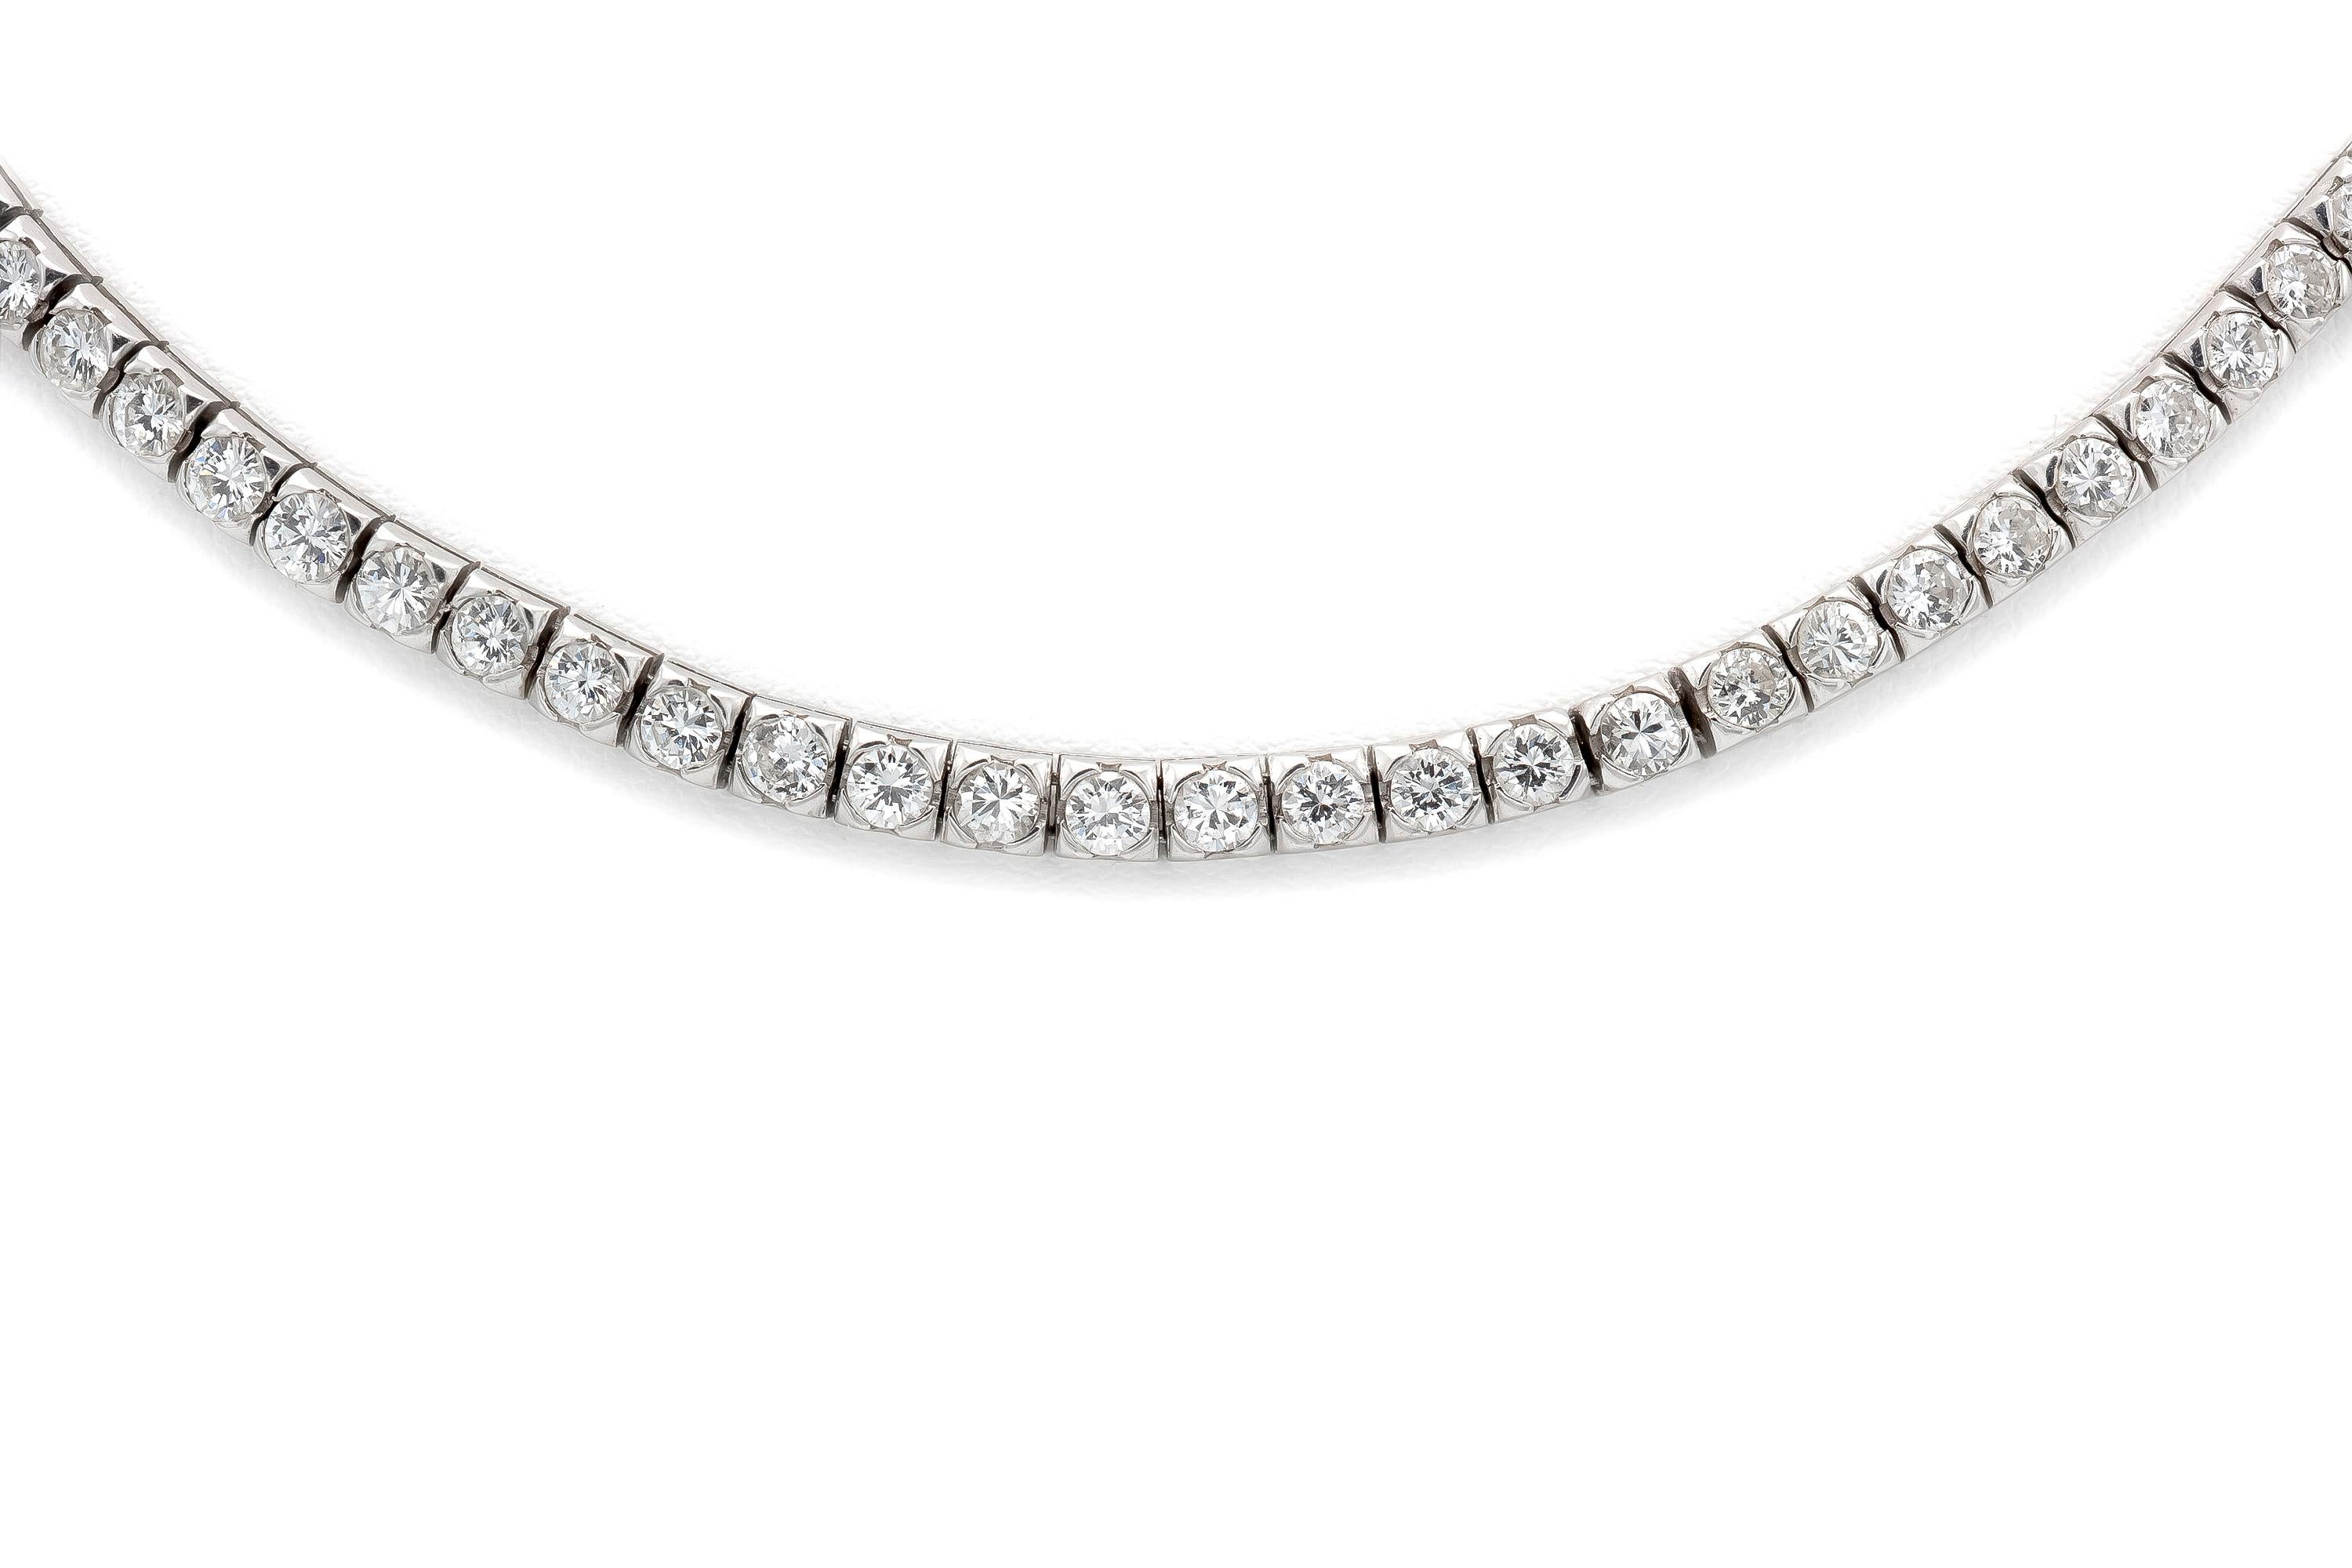 Finely crafted in platinum featuring diamonds all the way around weighing a total of 10.00 carats.